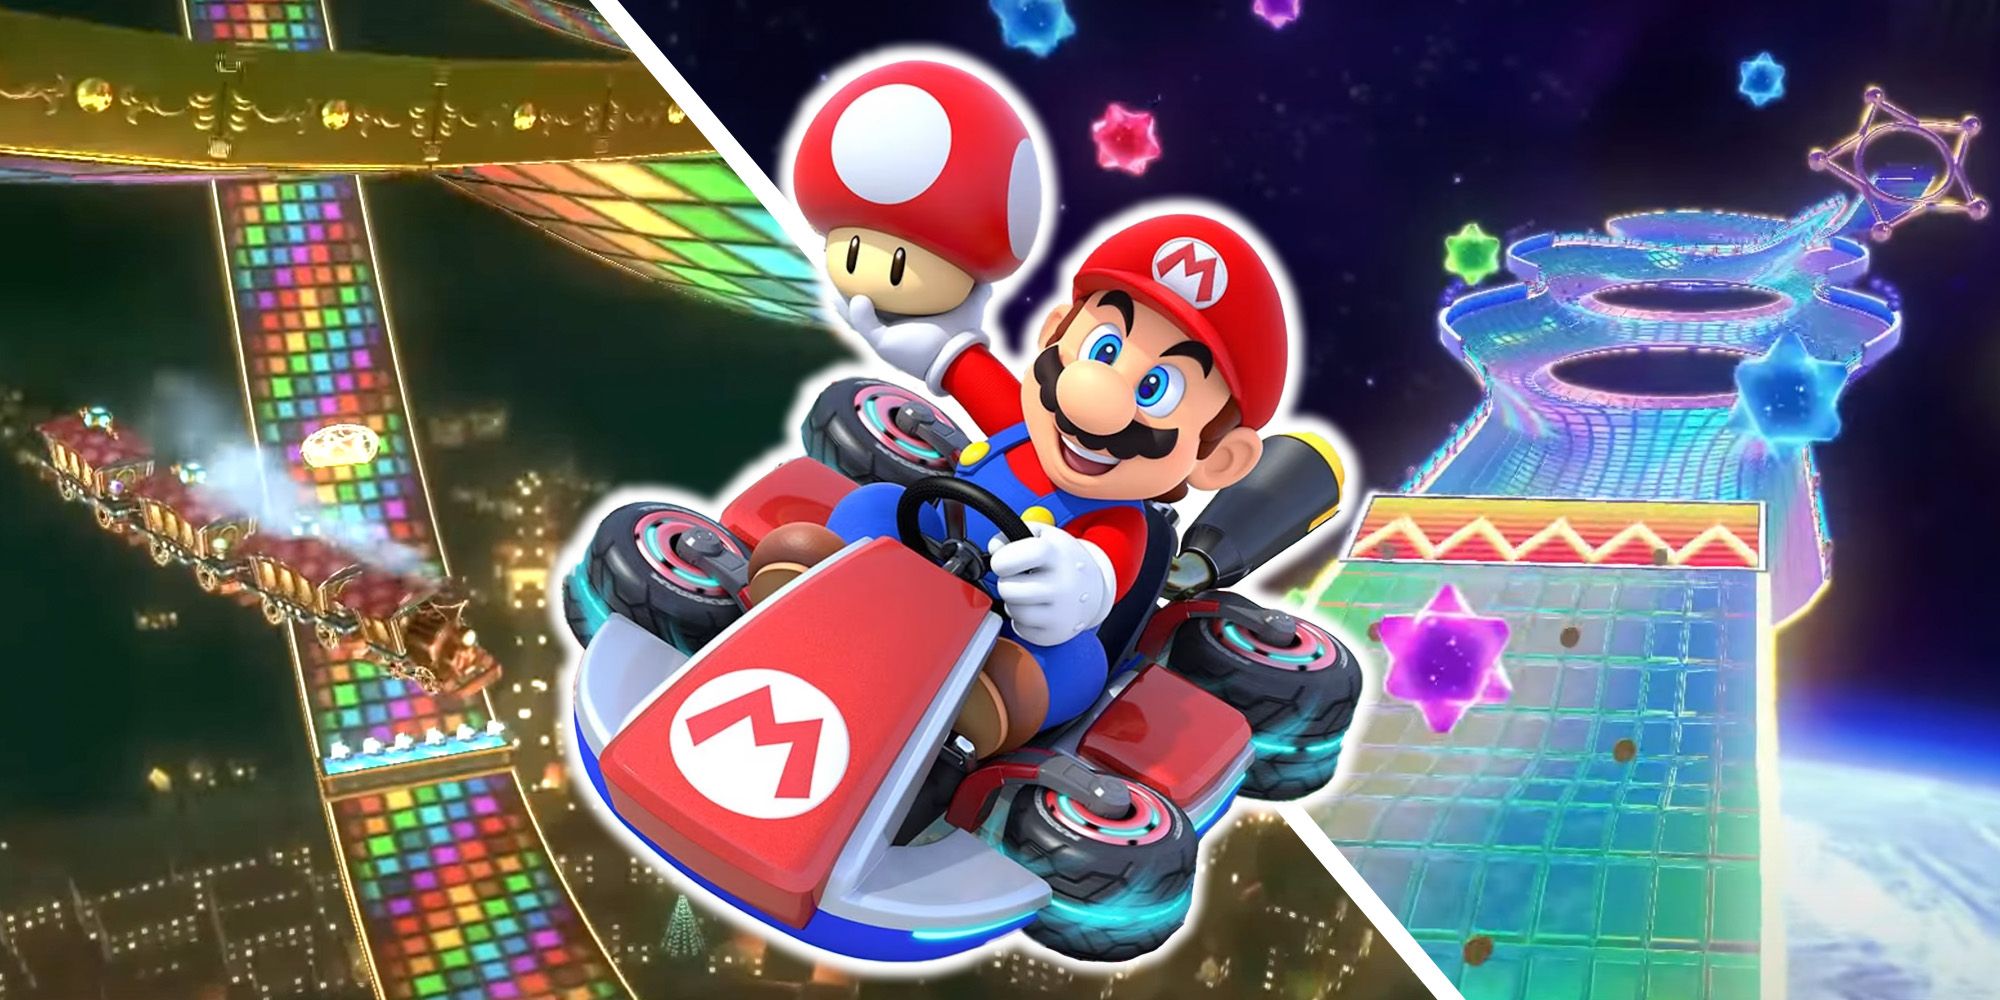 A split image of Rainbow Road N64 and Rainbw Road Wii from Mario Kart 8 Deluxe Booster Course Pass.